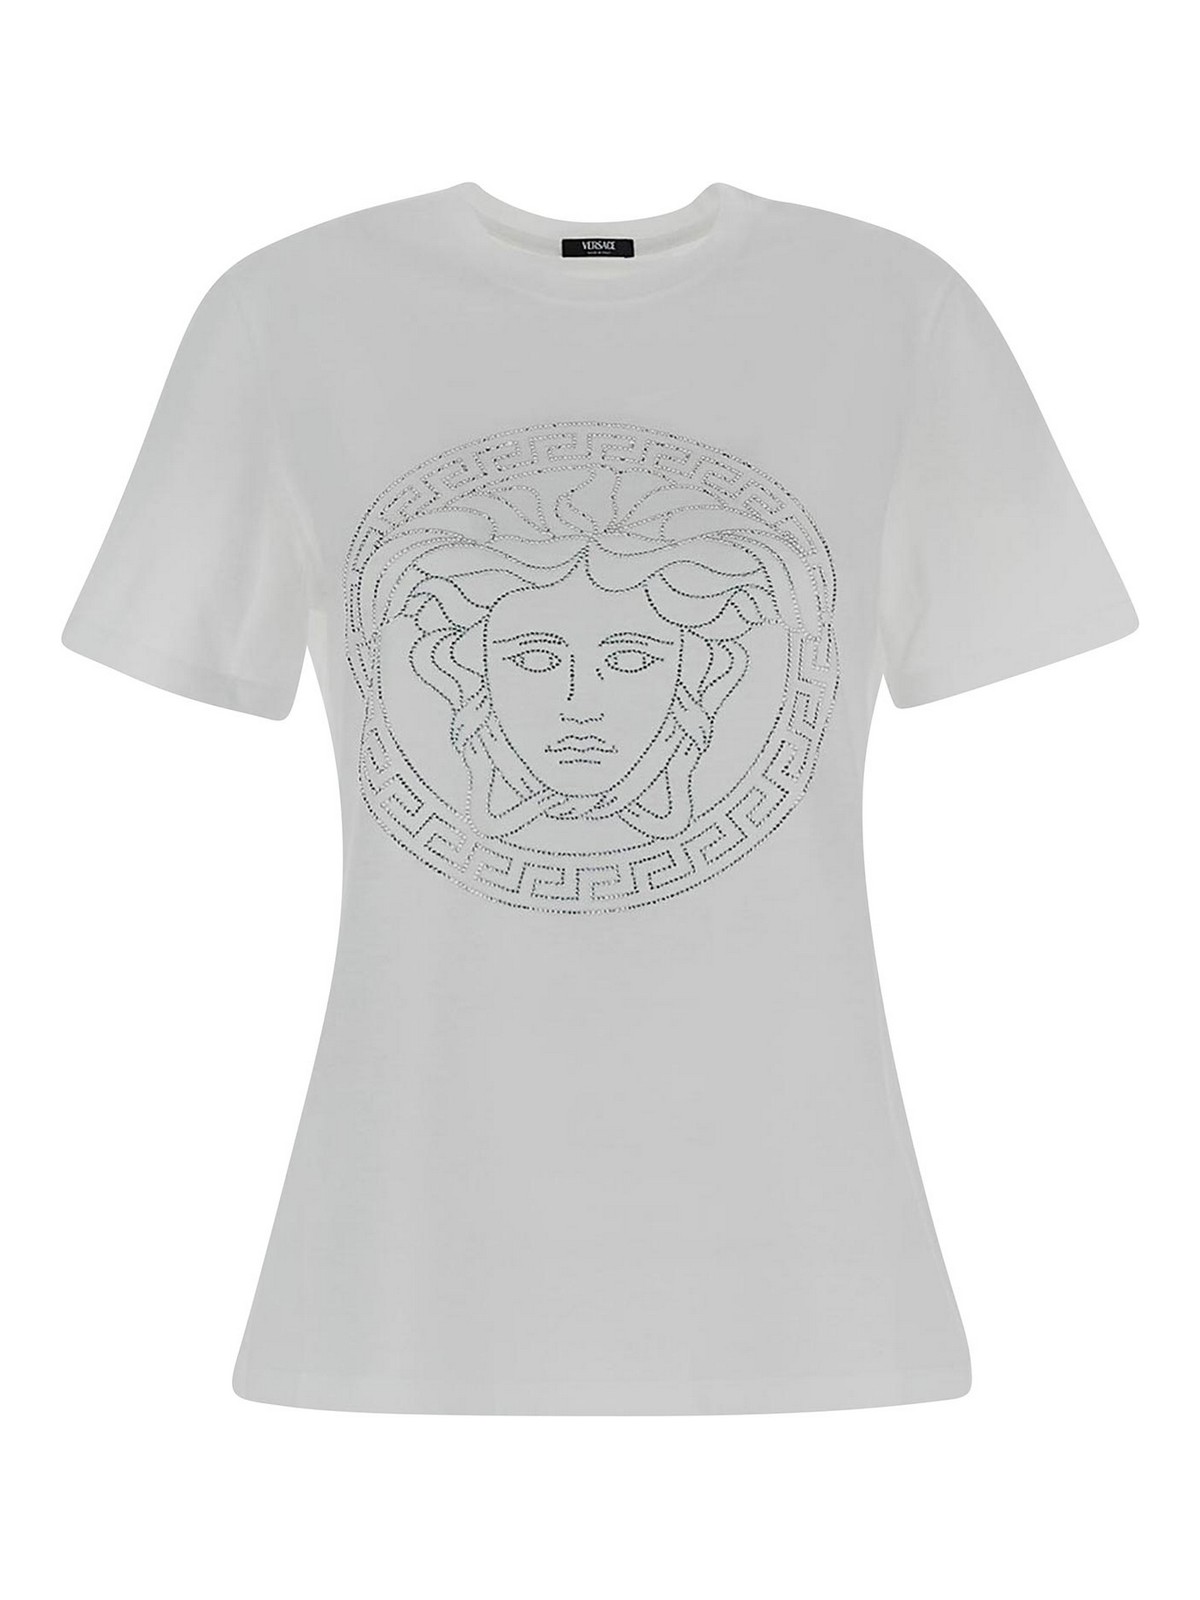 Versace T-shirt With Short Sleeves In White